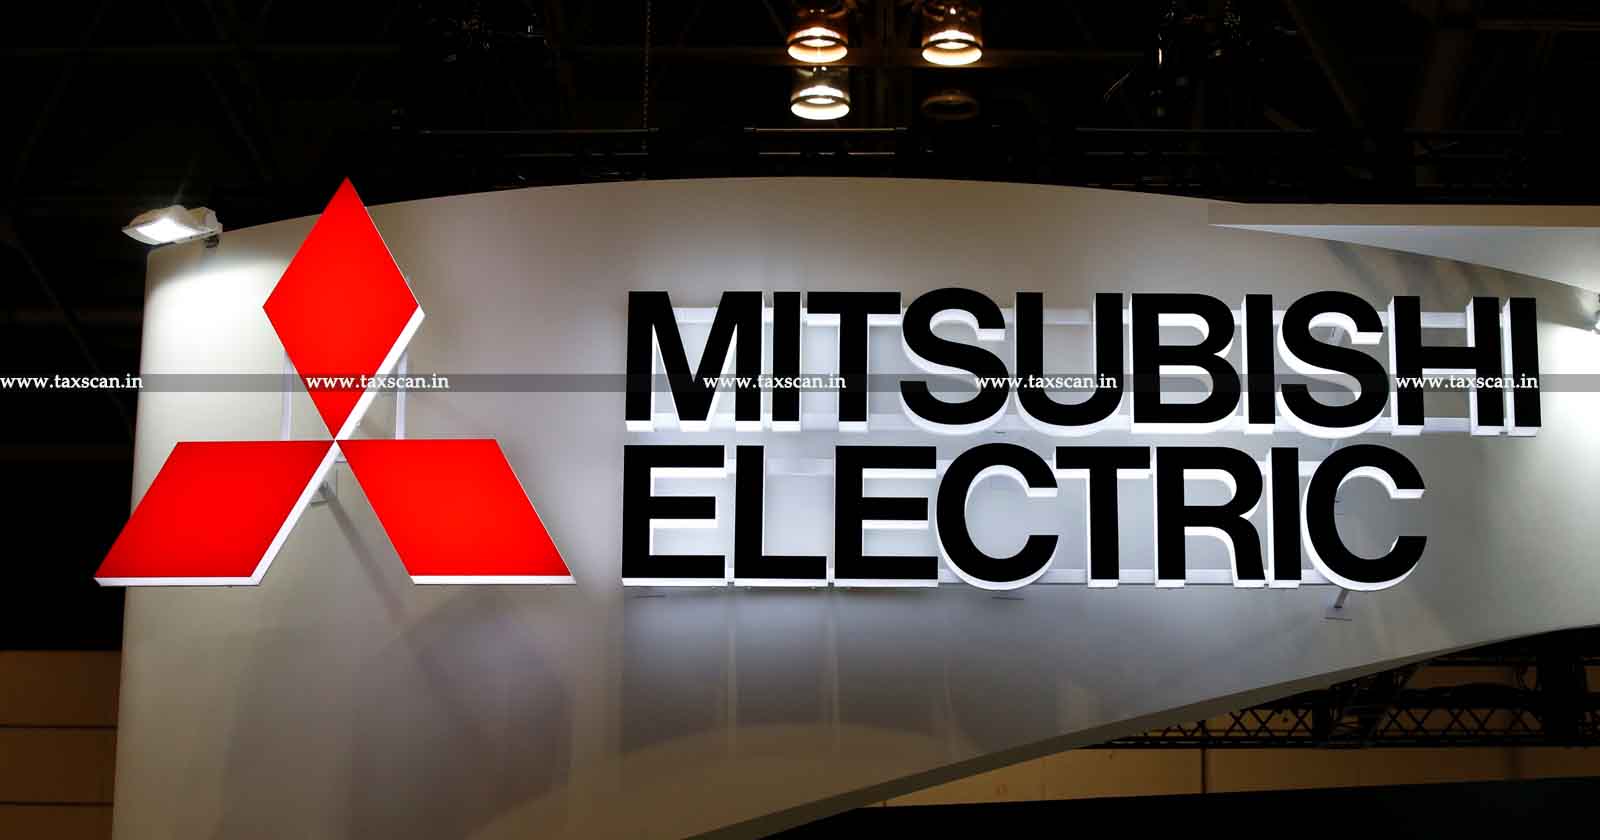 Mitsubishi Electric India-Failure to Consider Tax Paid -Salary Received - Indian Currency-Punjab and Haryana HC - Proceedings - GST Act-TAXSCAN